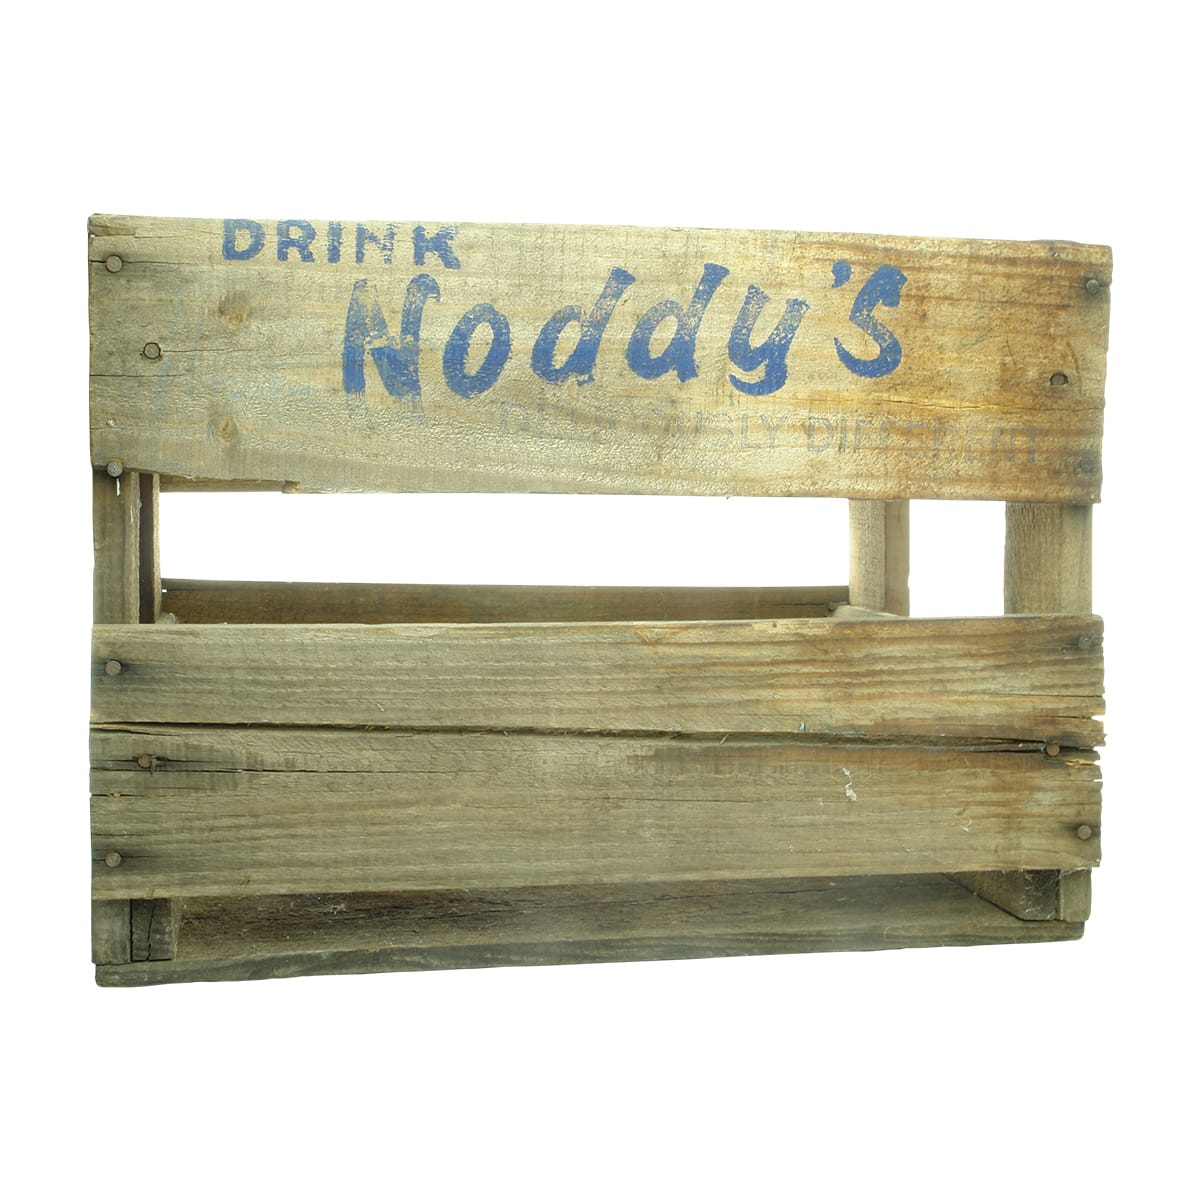 Soft Drinks Crate. Noddy's Deliciously Different.